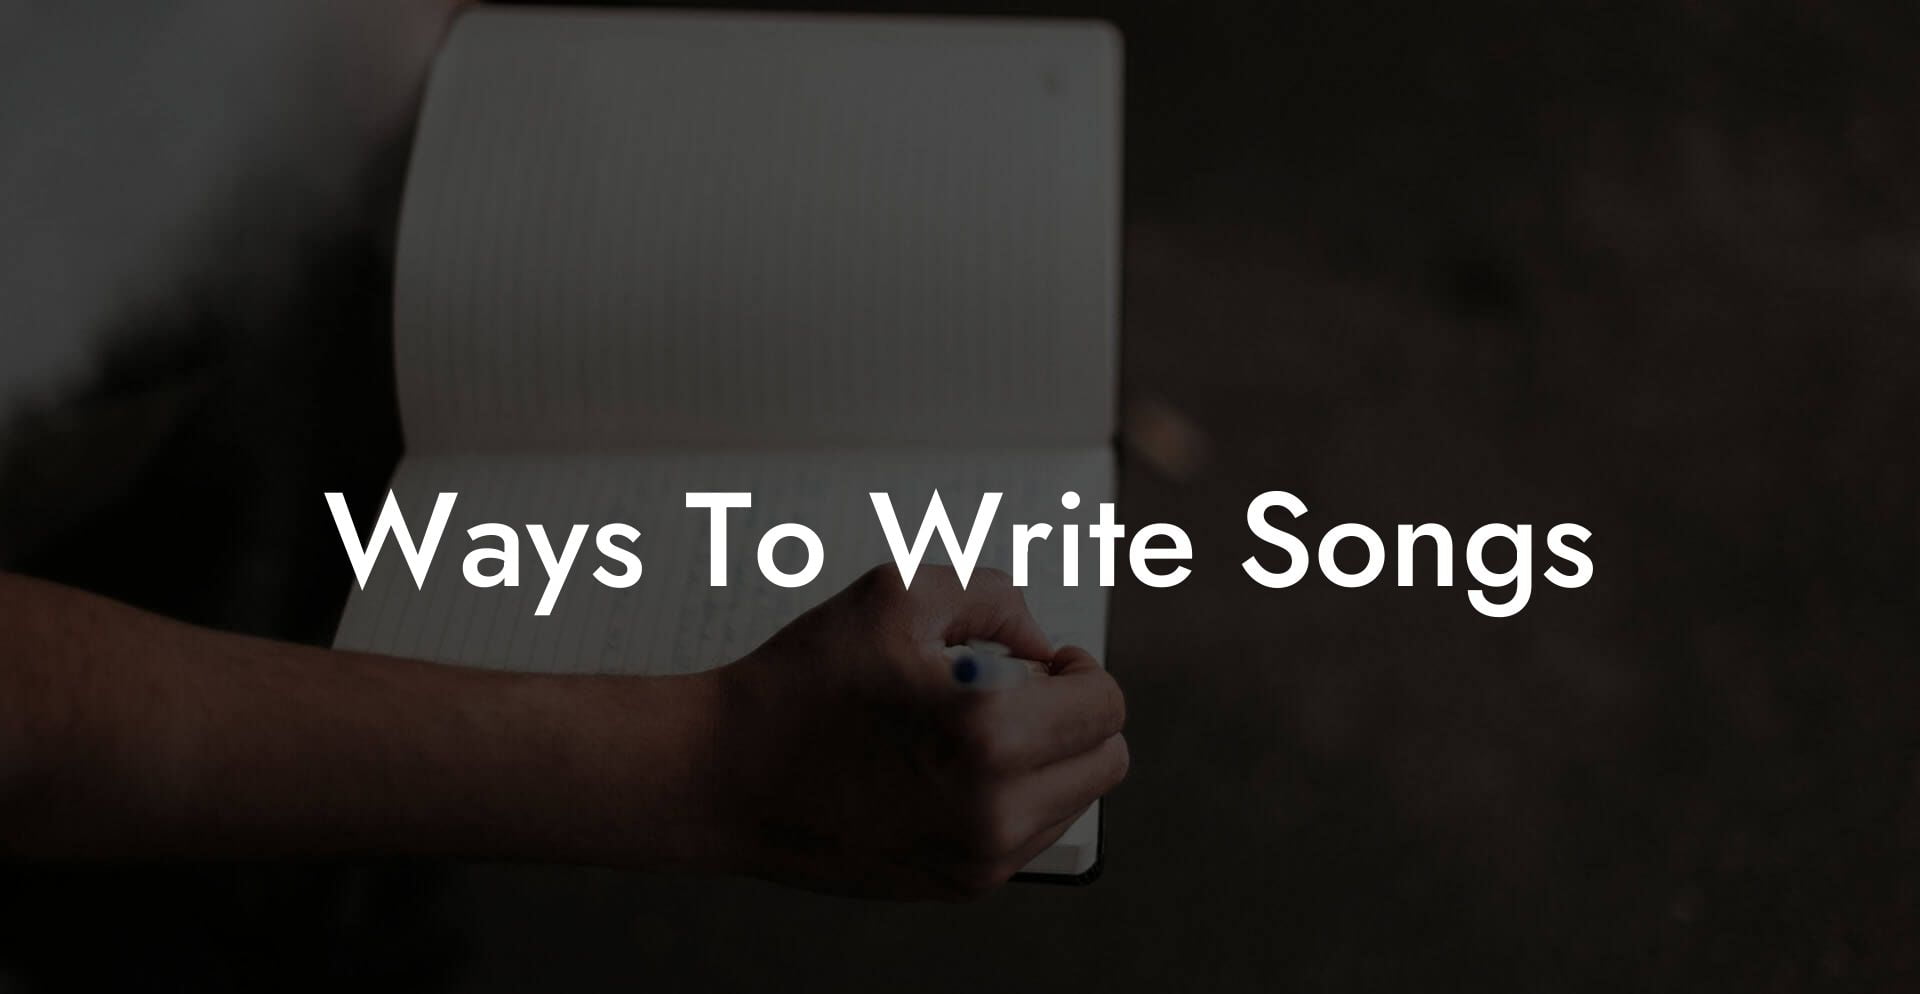 ways to write songs lyric assistant